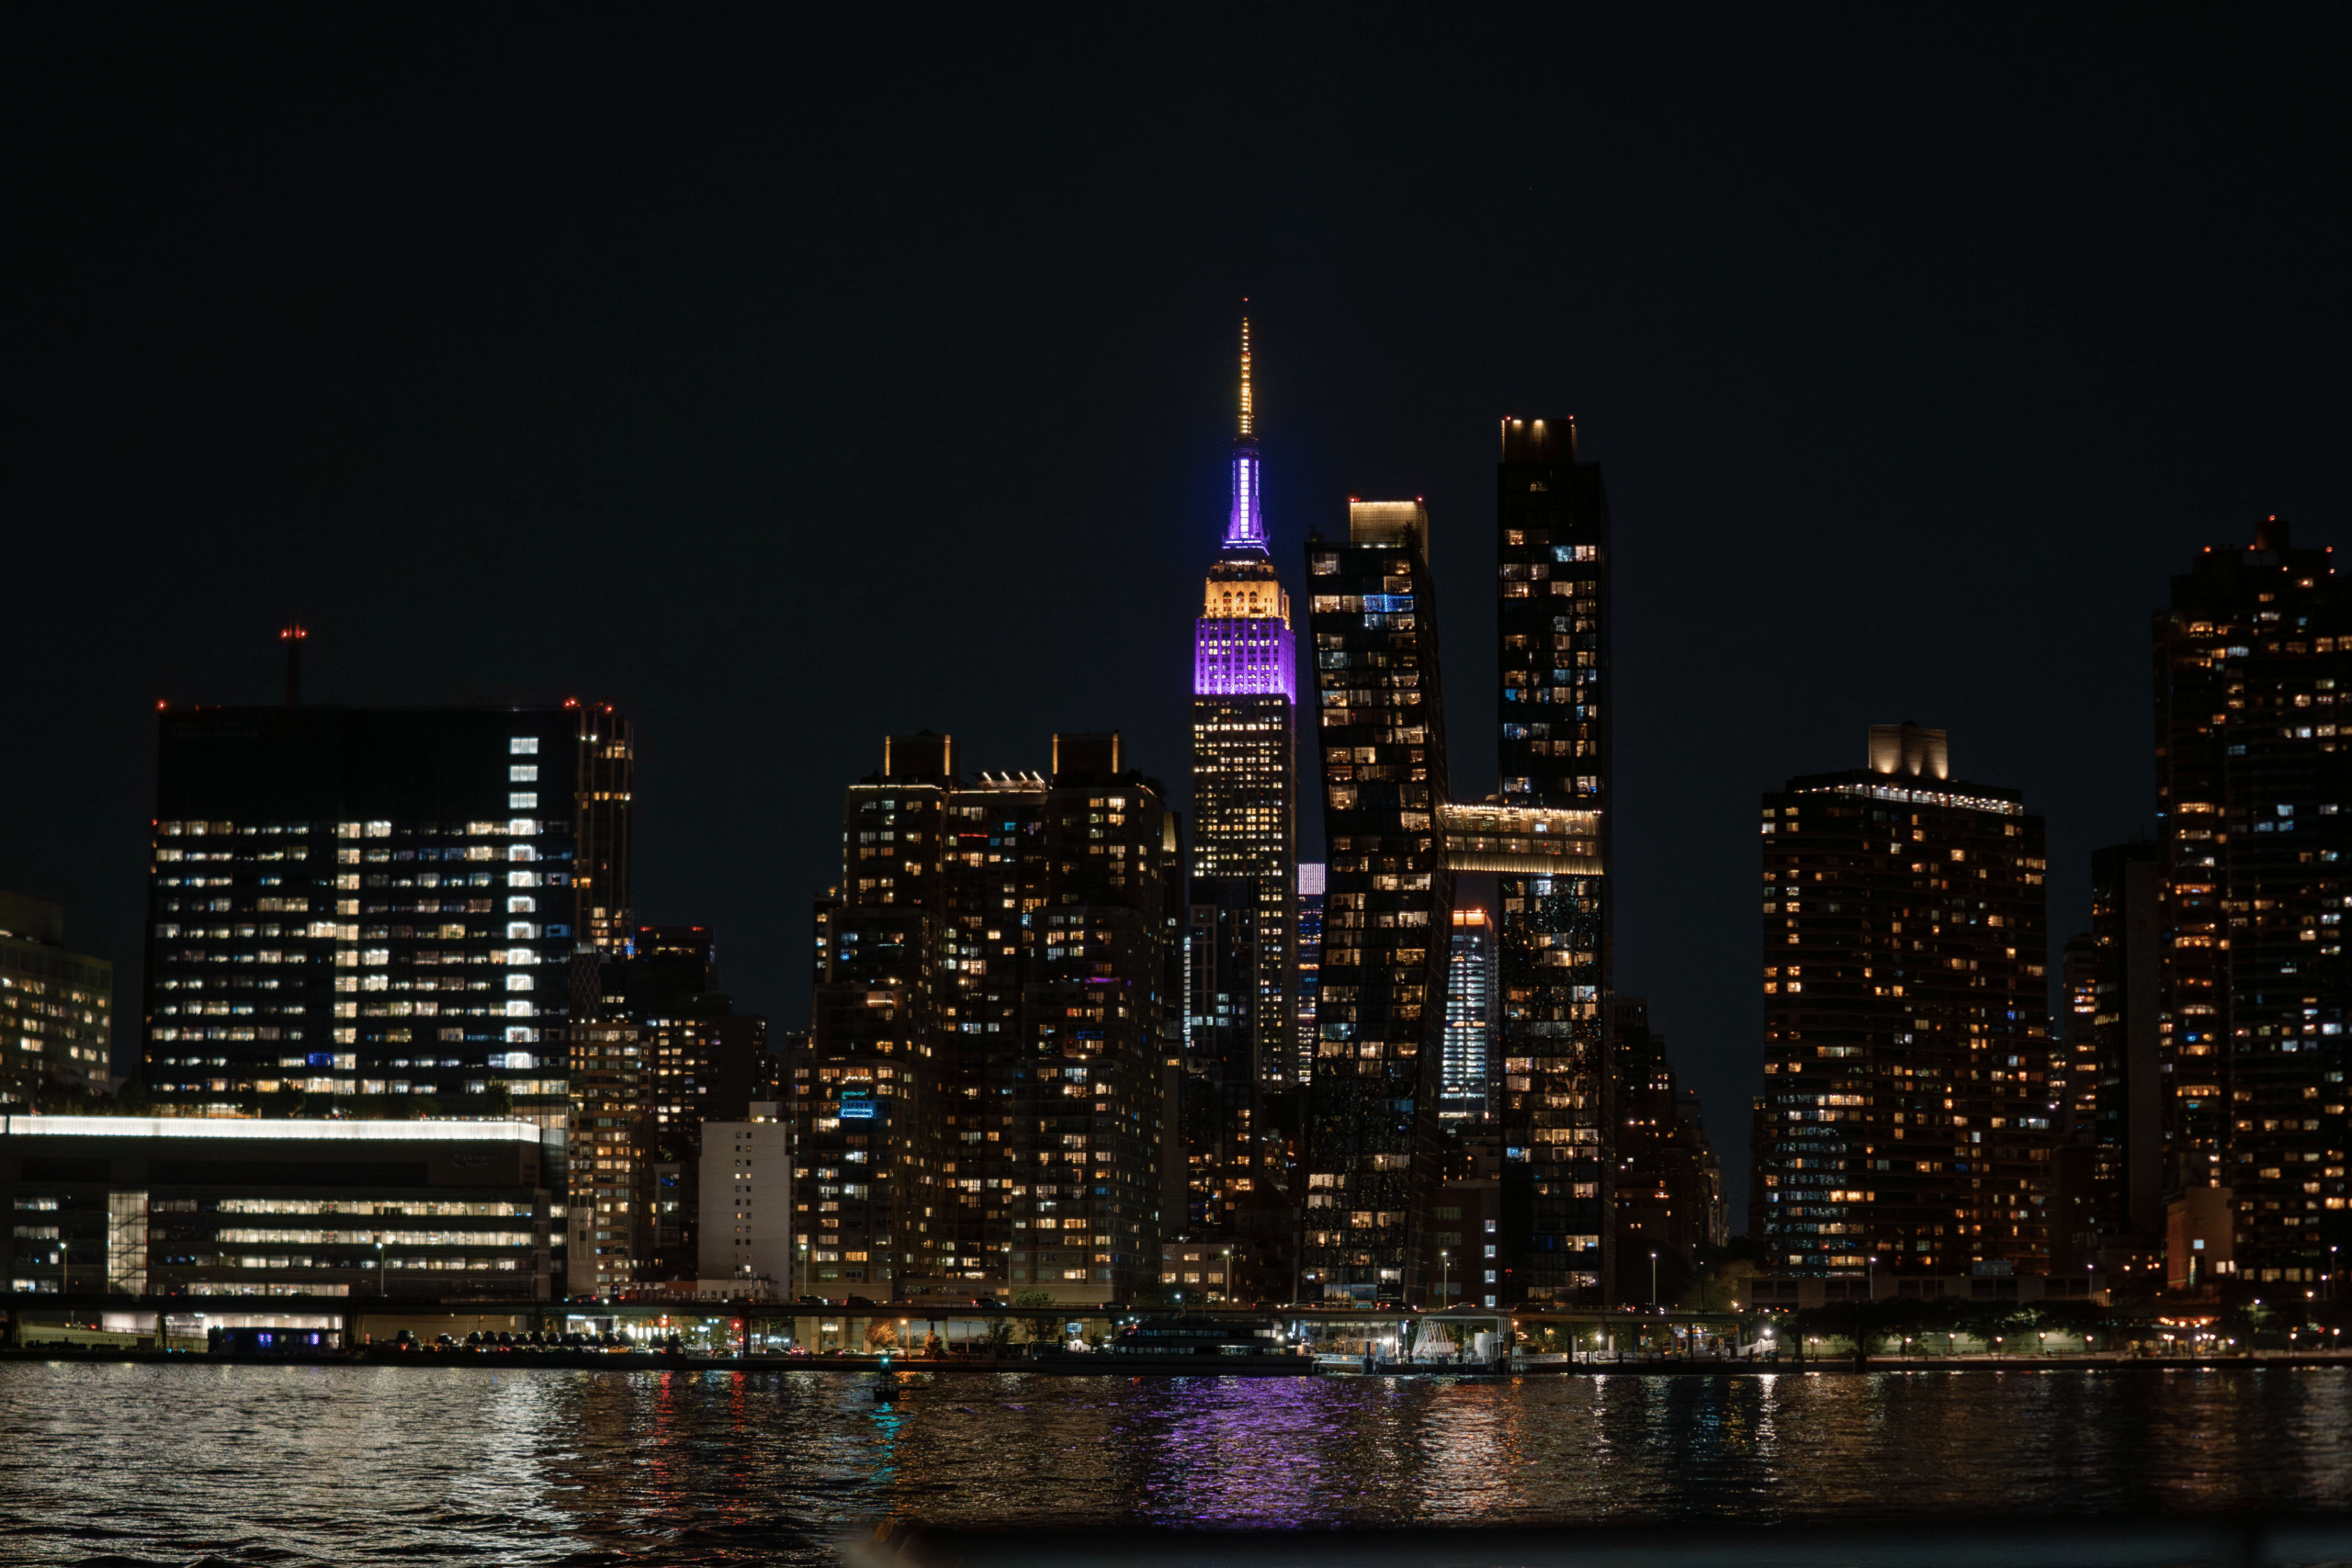 The empire state building is illuminated at night, showcasing the immense community support.